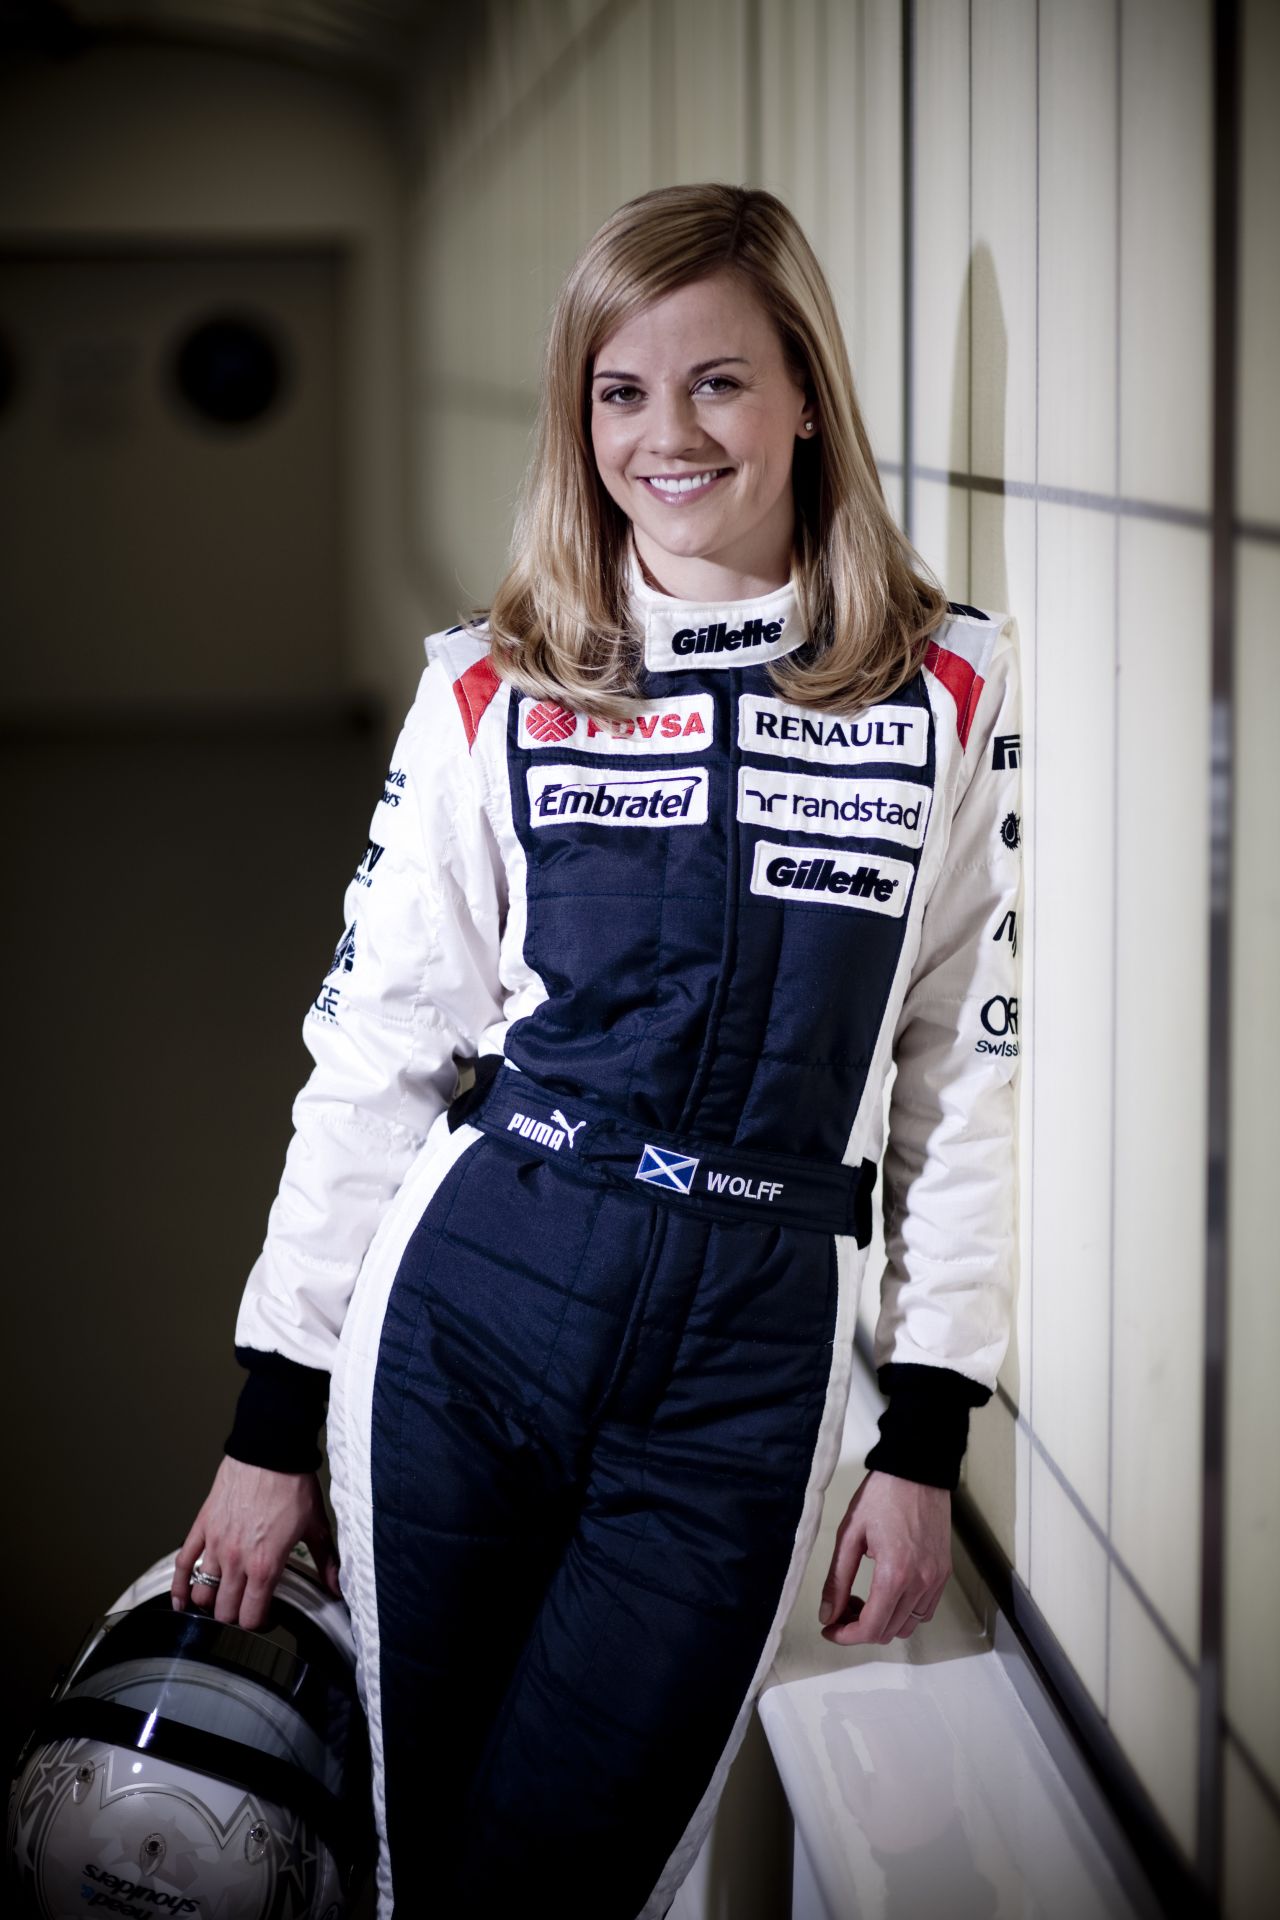 Wolff signed for the Williams F1 team as a development driver in April 2012.  "Sometimes in life you just need a chance. Claire and Frank (Williams) gave me that chance," she told CNN.